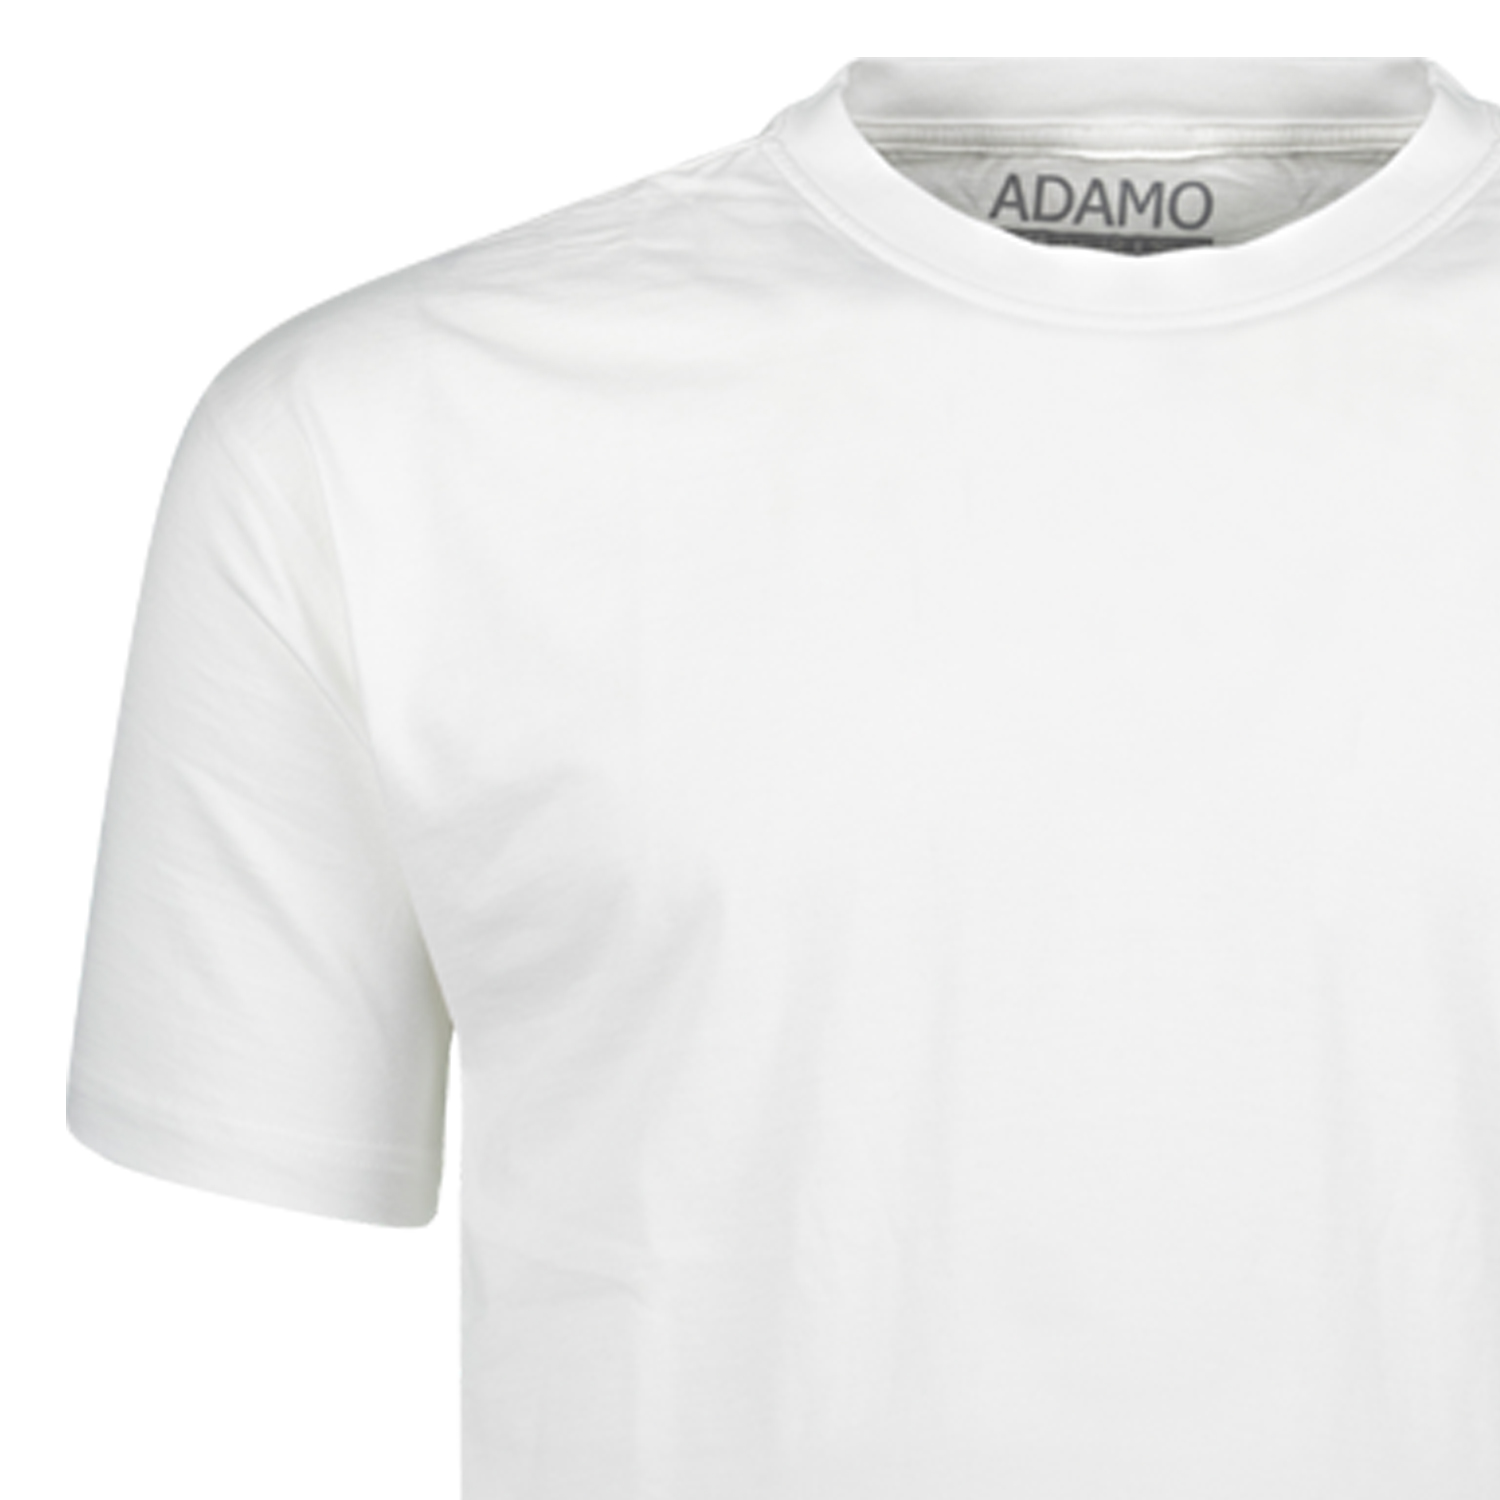 T-shirts in white series Kevin regular fit by Adamo for men up to oversize 10XL